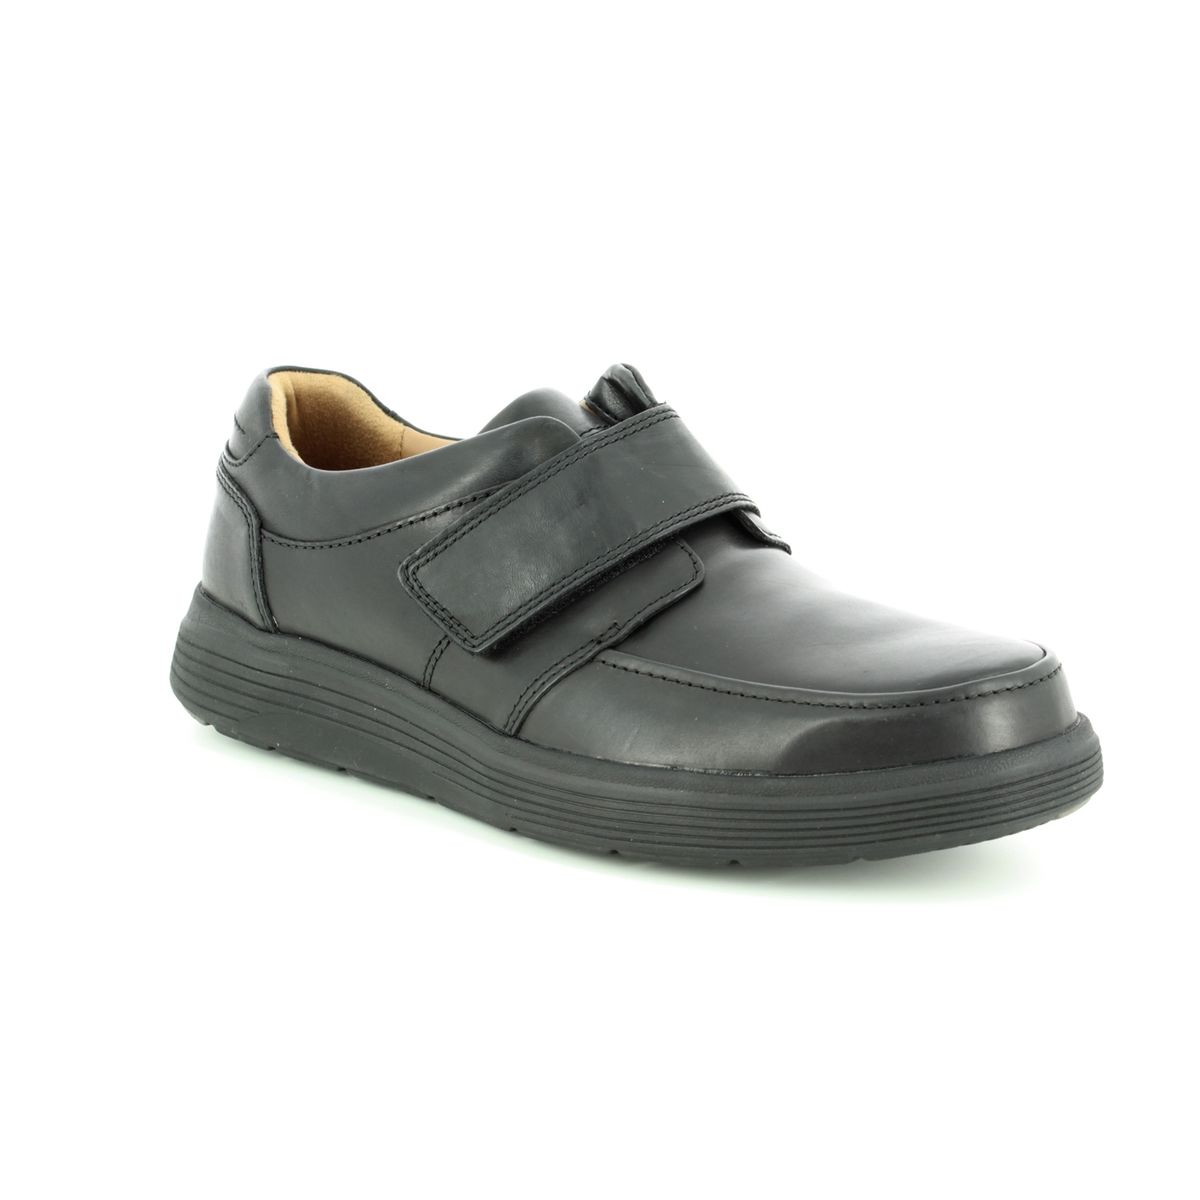 Clarks Un Abode Strap Black Leather Mens Comfort Shoes 3698-68H In Size 13 In Plain Black Leather H Width Fitting Extra Wide